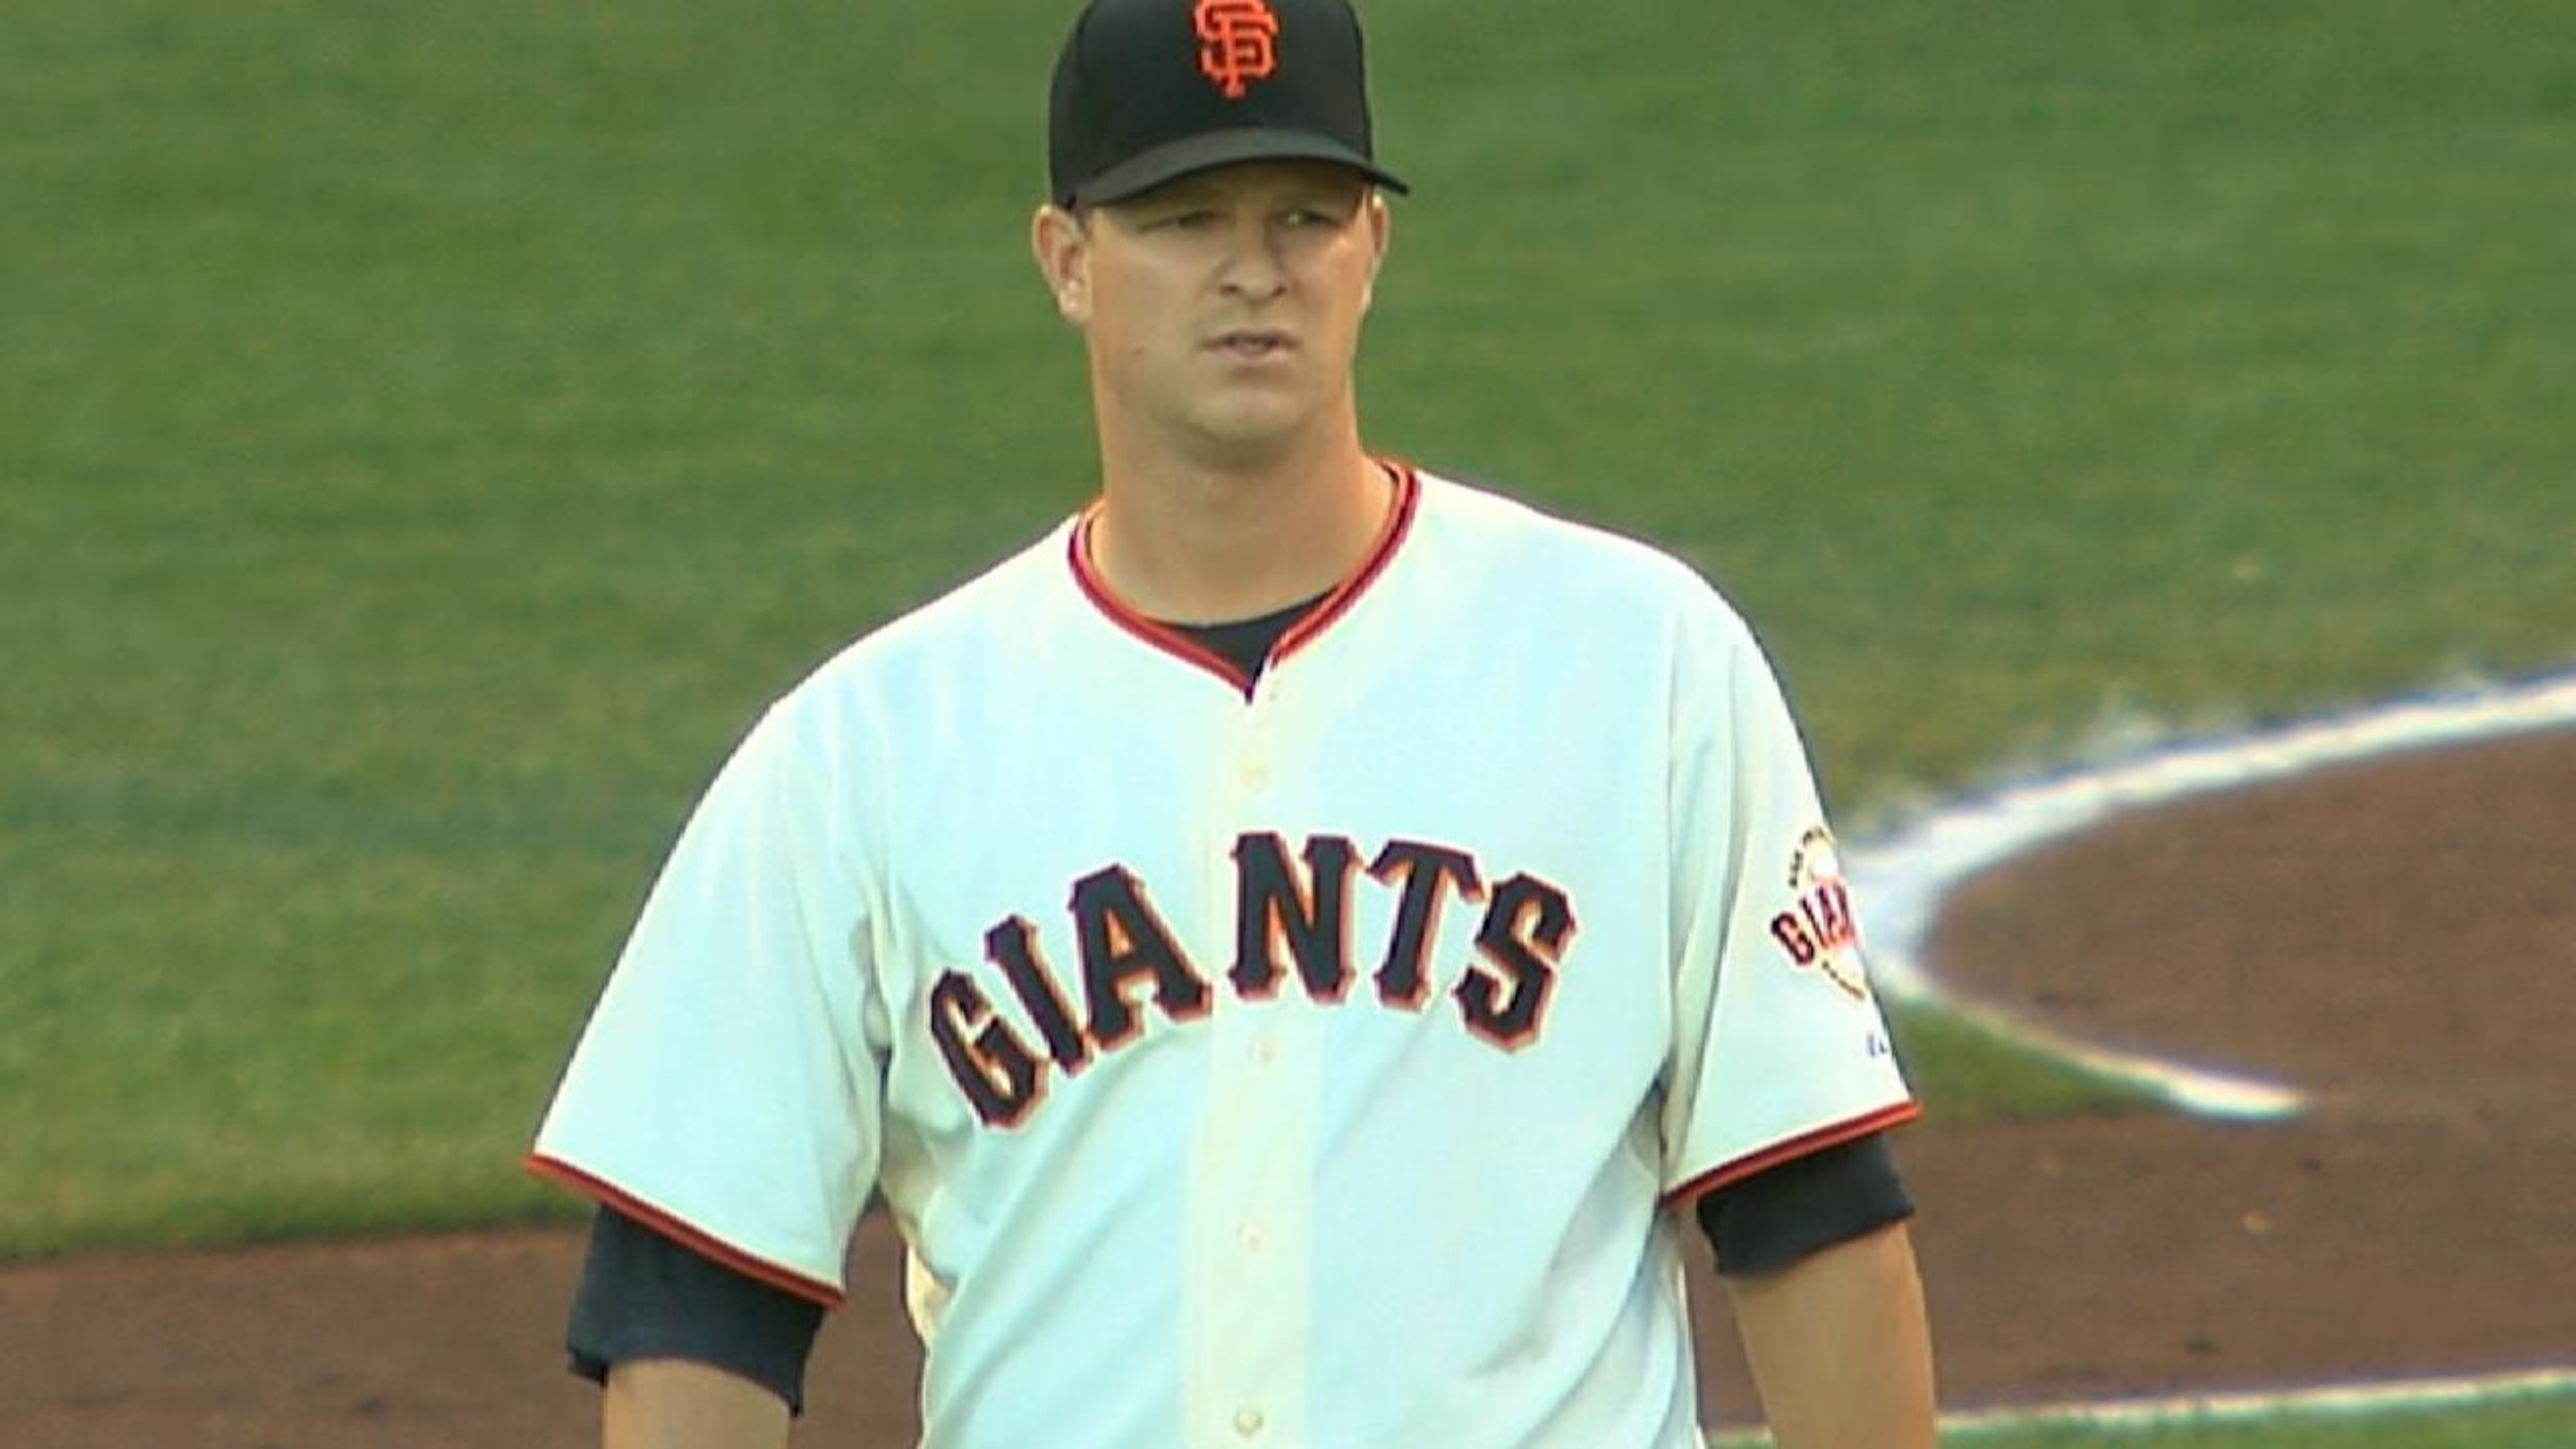 Matt Cain's dominant perfect game cemented his place in Giants